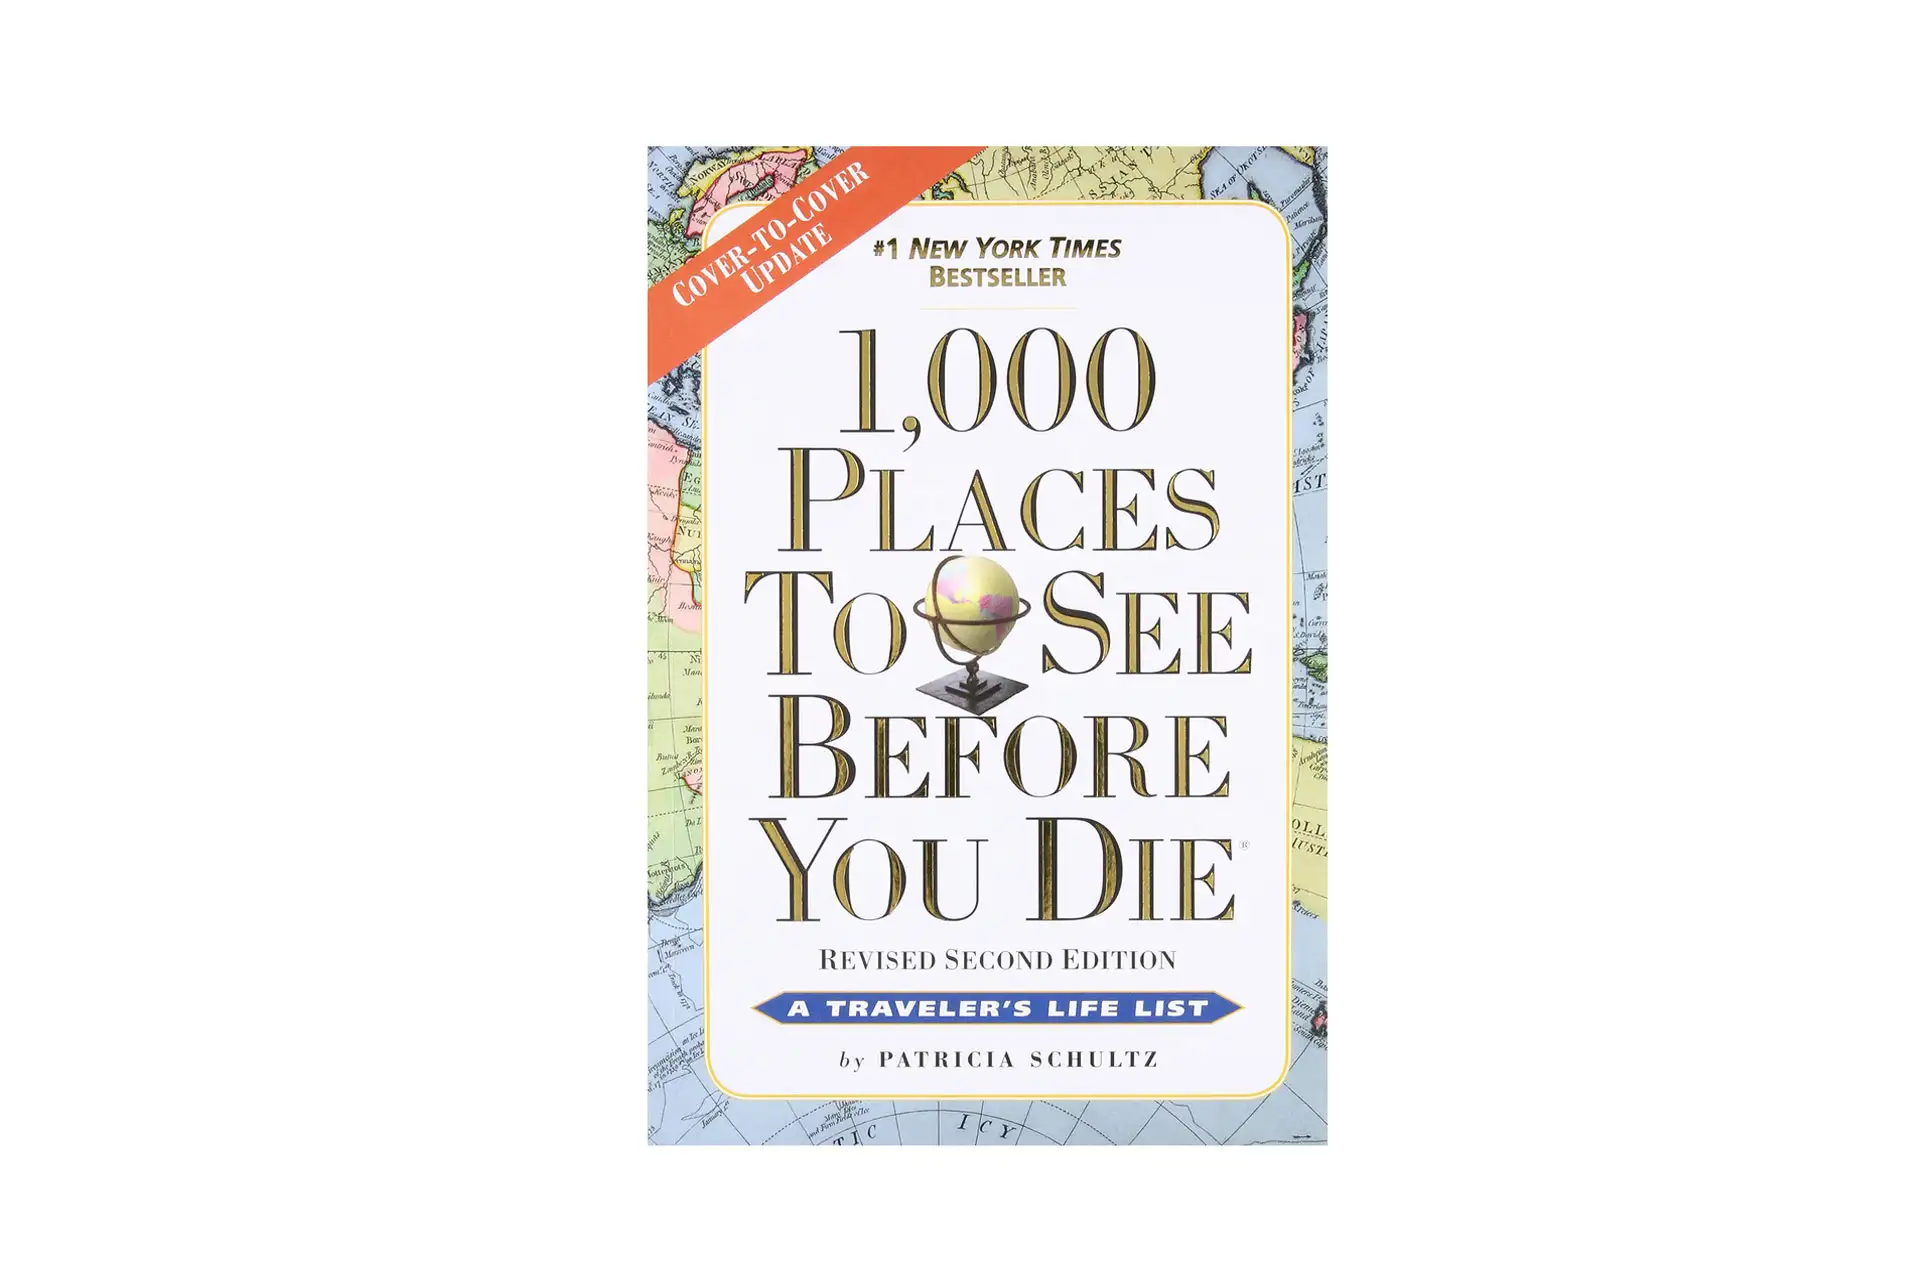 1,000 Places to See Before You Die Book; Courtesy of Amazon